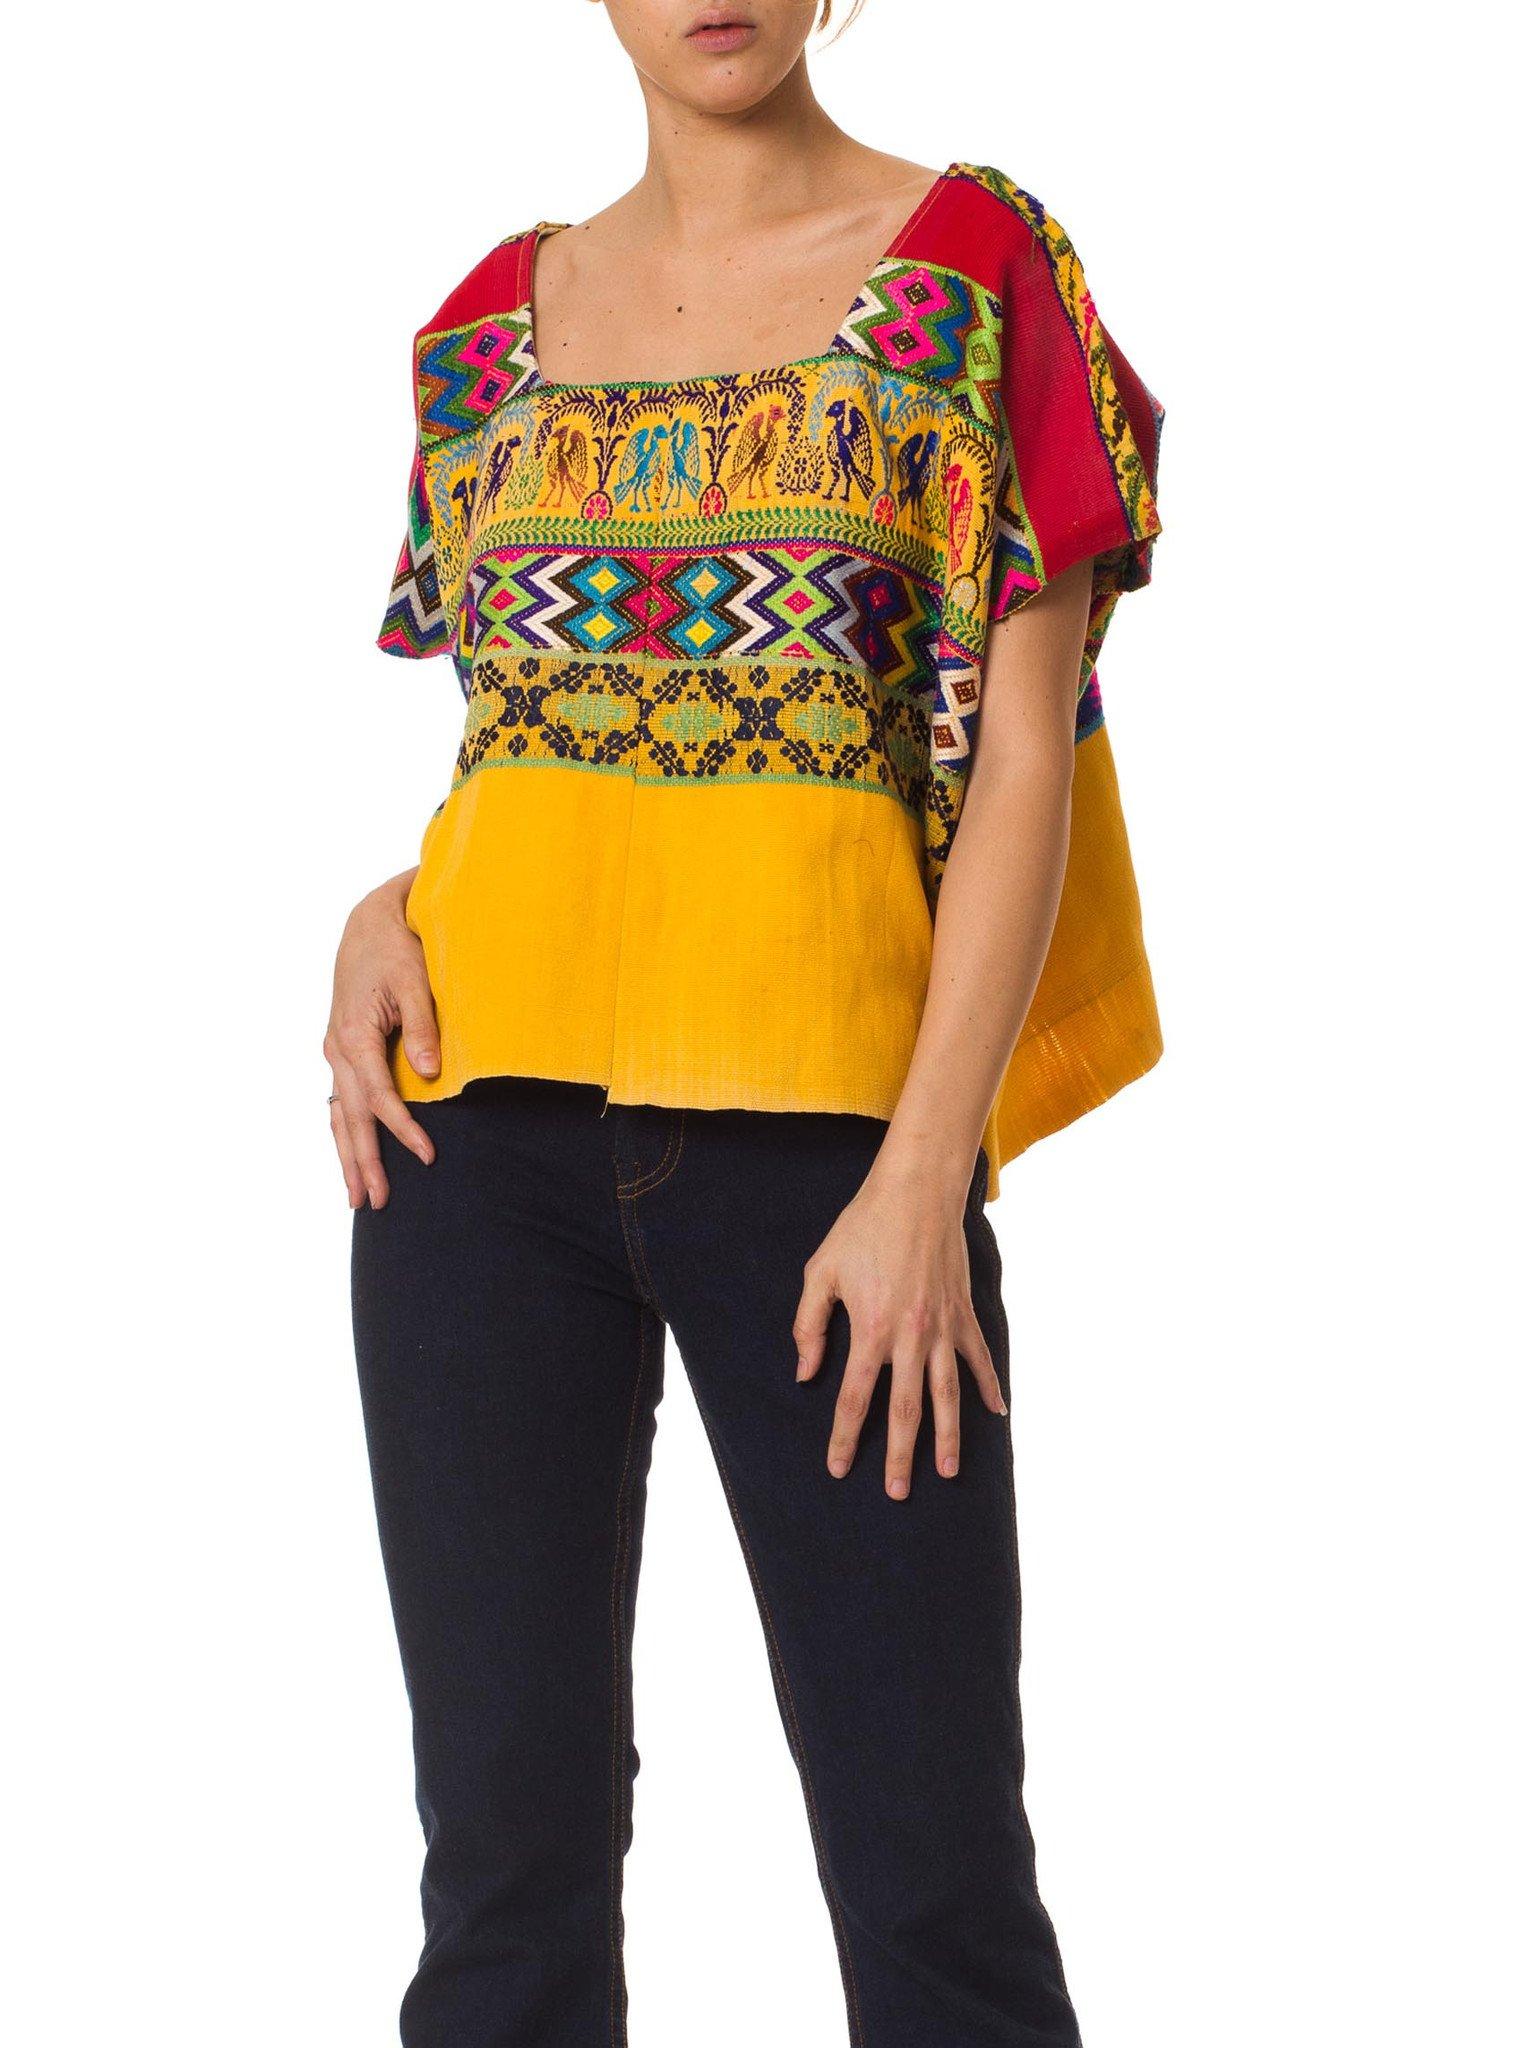 1970S Red & Yellow Cotton Top With Geometric Ethnic Hand Embroidery For Sale 2